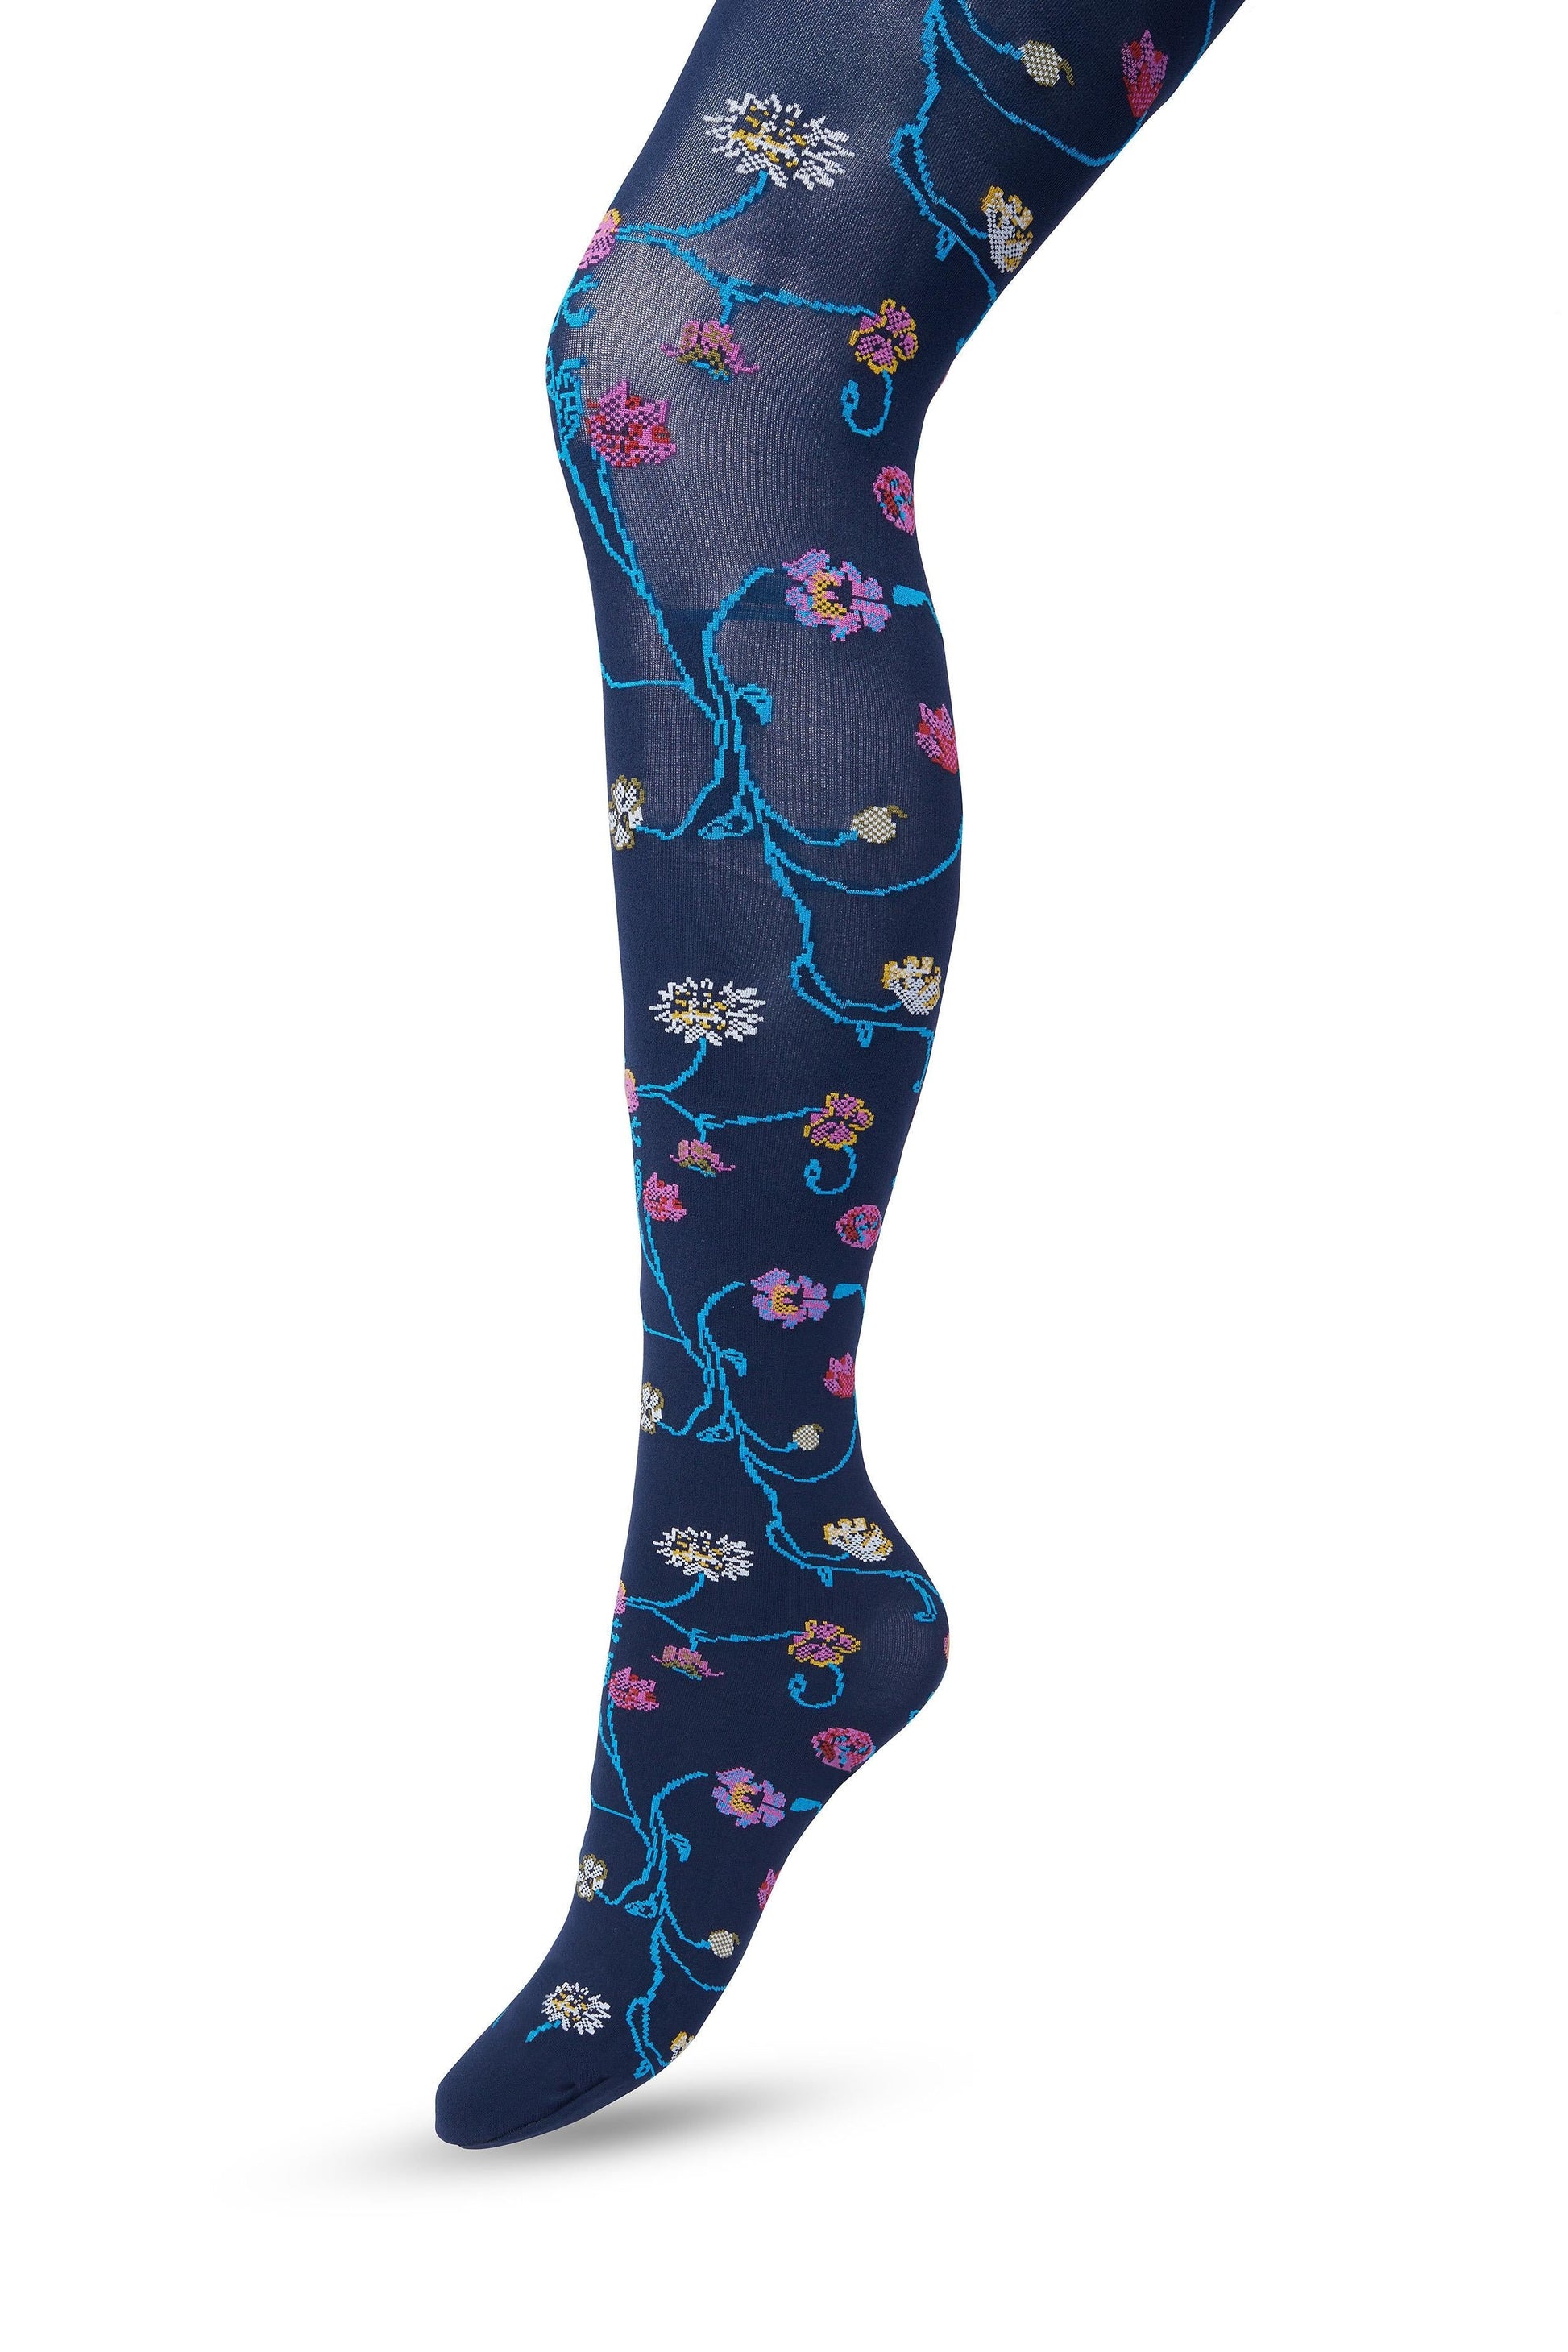 Bonnie Doon Floral Tights - Soft navy blue opaque fashion tights with a multicoloured woven floral pattern